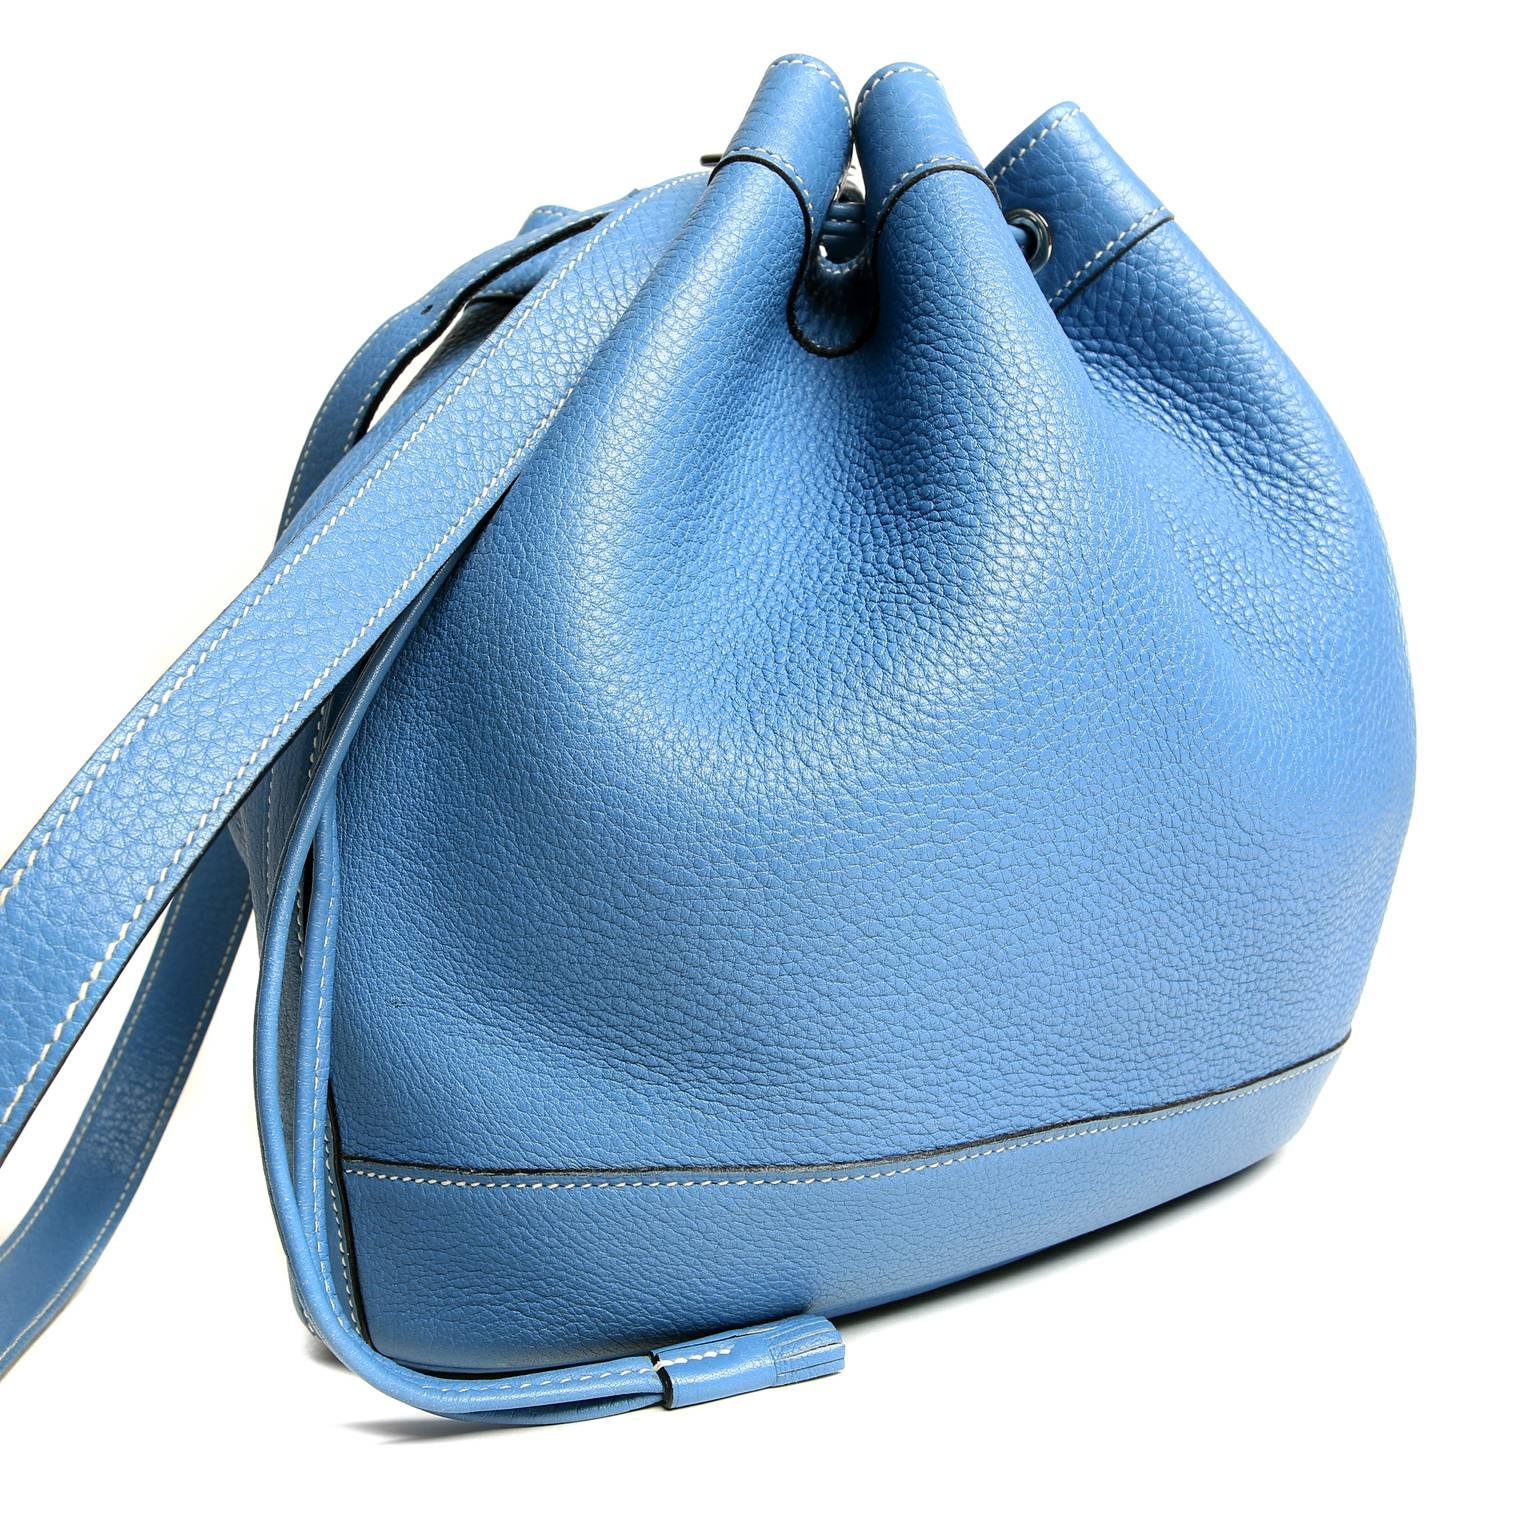 Hermes Blue Jean Clemence Leather Market Bucket Bag In Excellent Condition For Sale In Malibu, CA